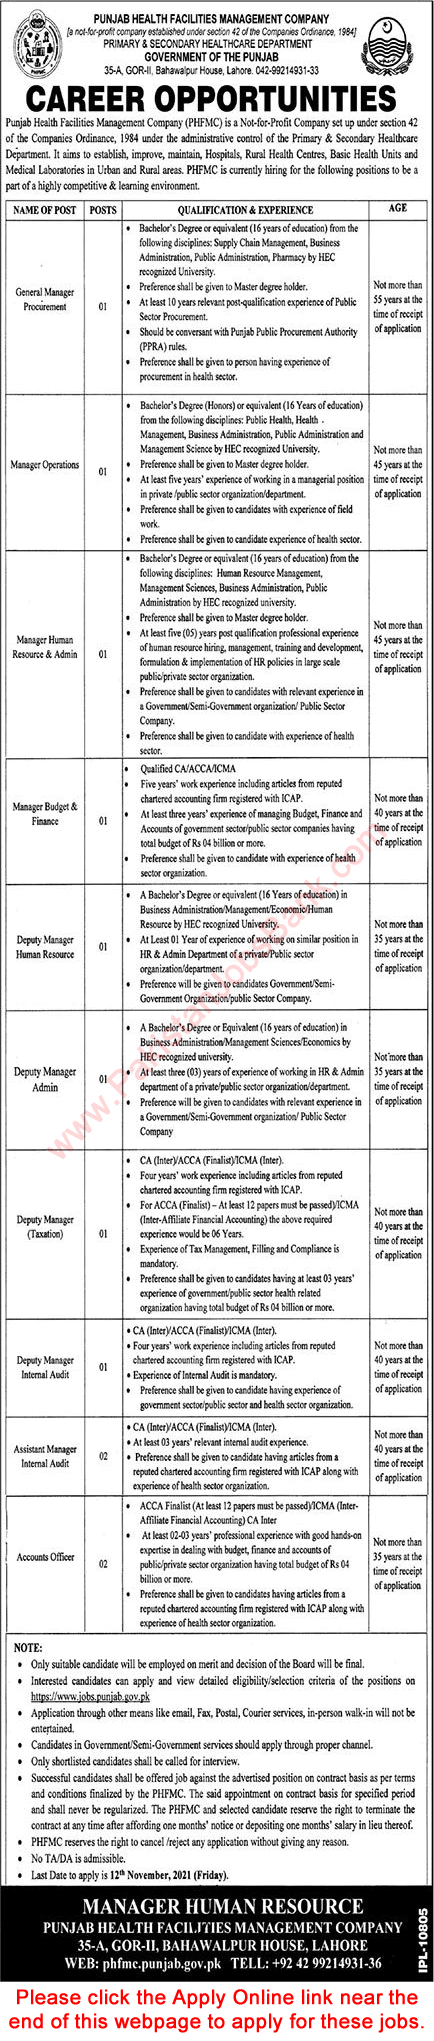 Punjab Health Facilities Management Company Jobs October 2021 PHFMC Apply Online Primary and Secondary Healthcare Department Latest